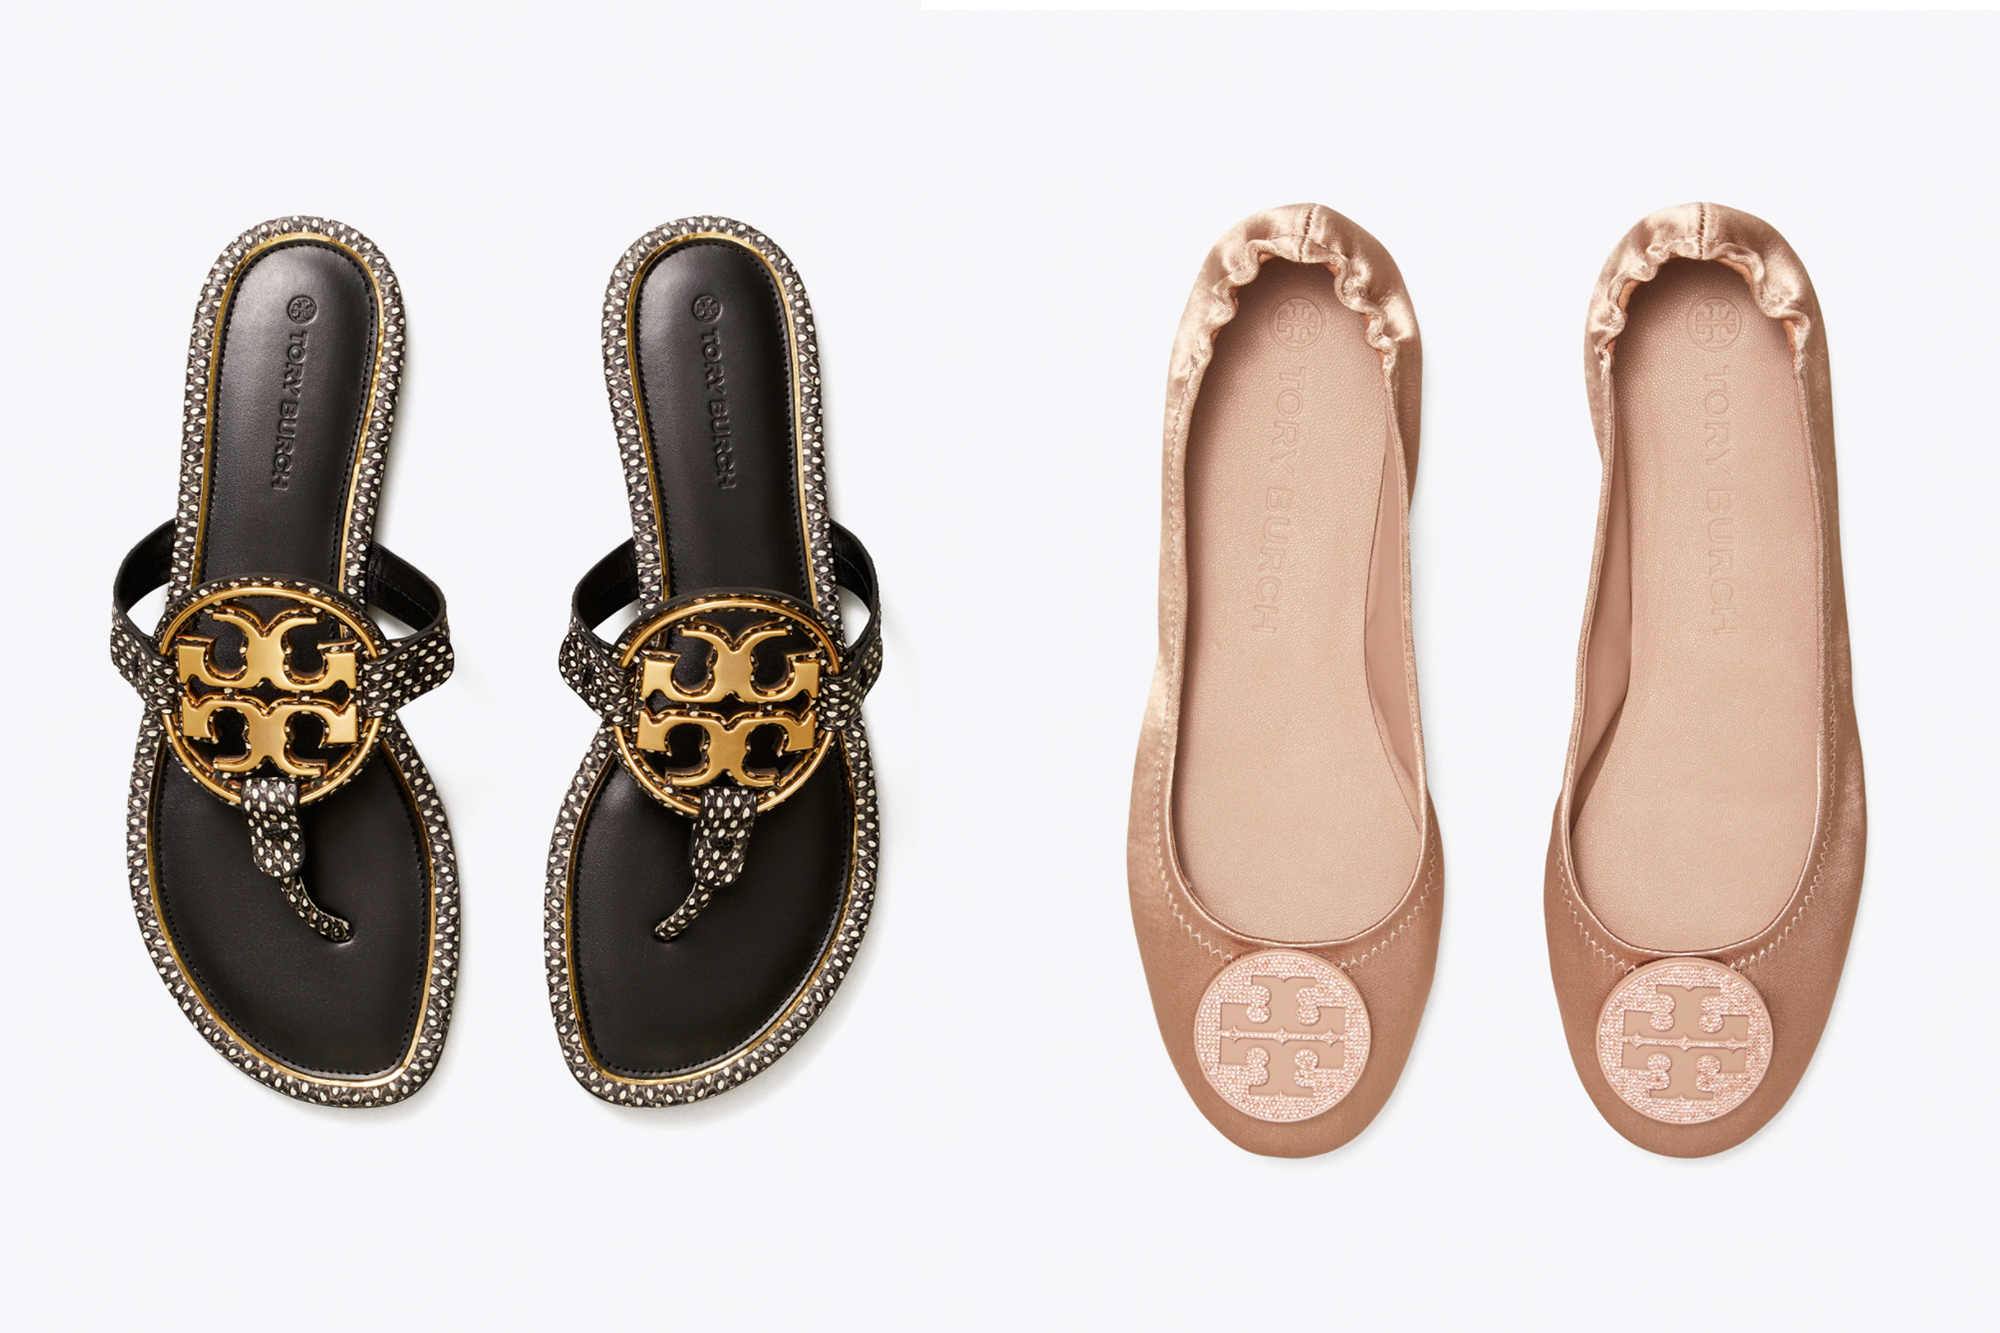 tory burch slippers sale